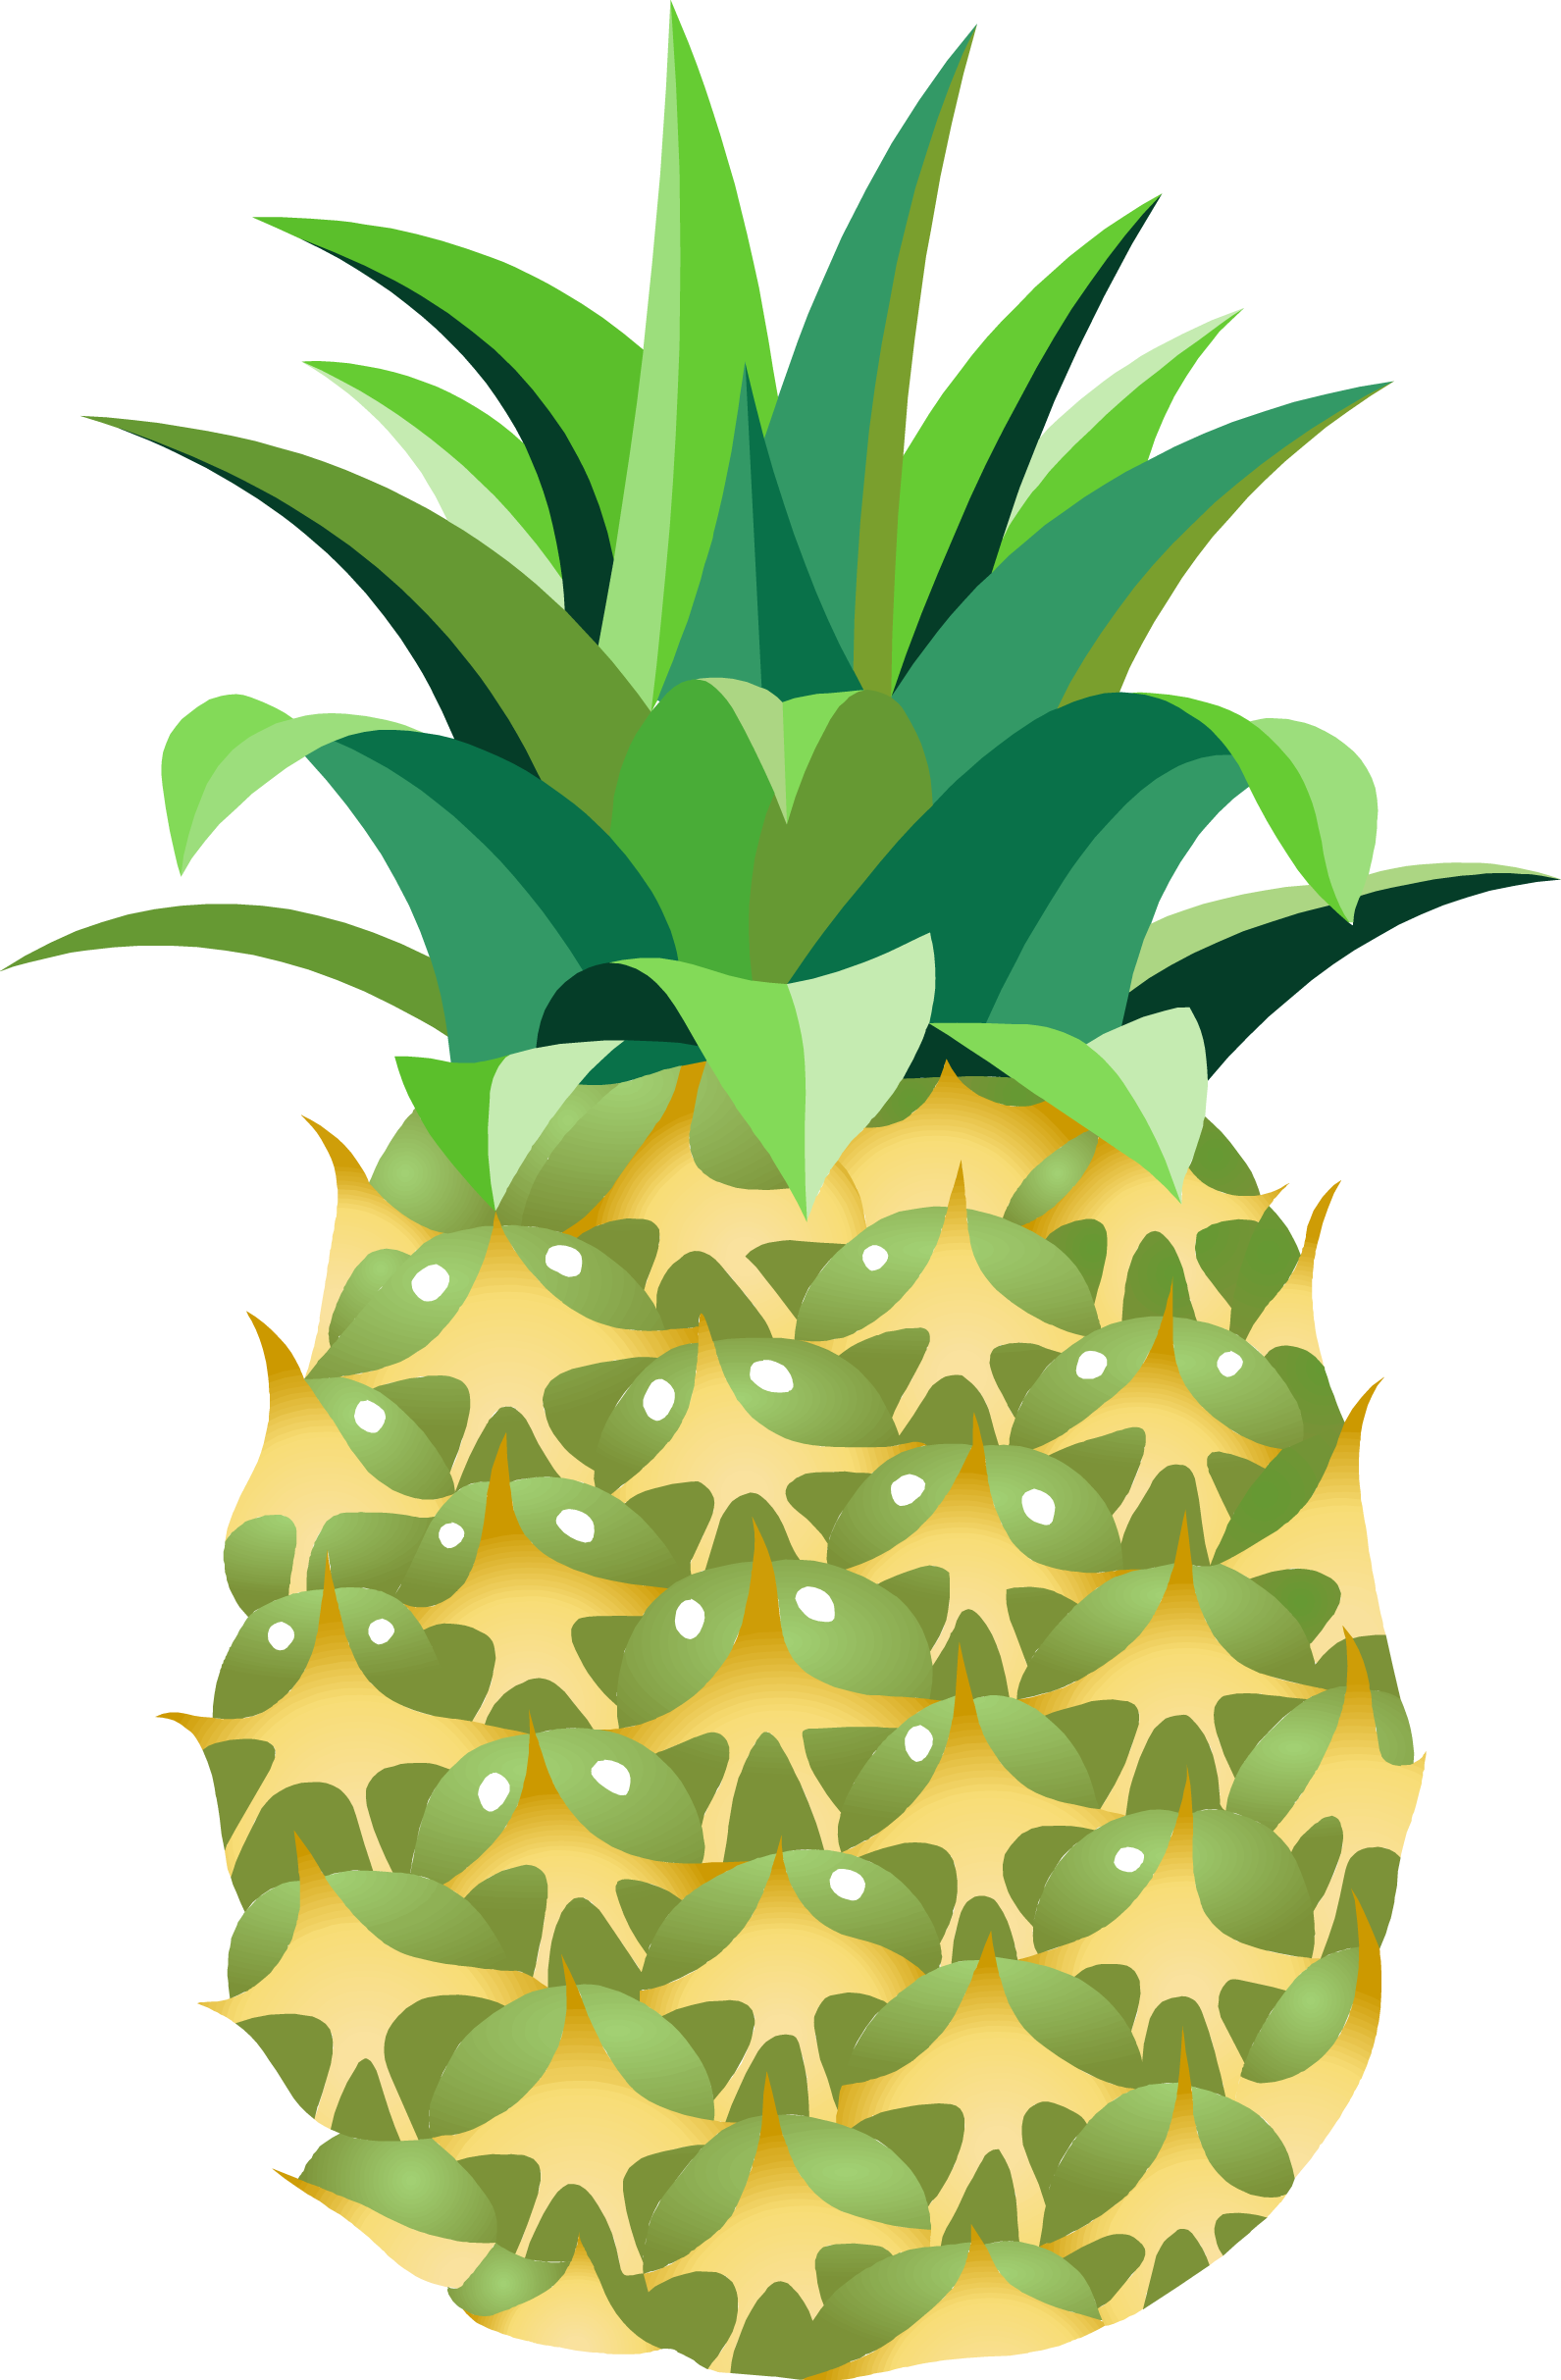 Pineapple PNG Image in Transparent